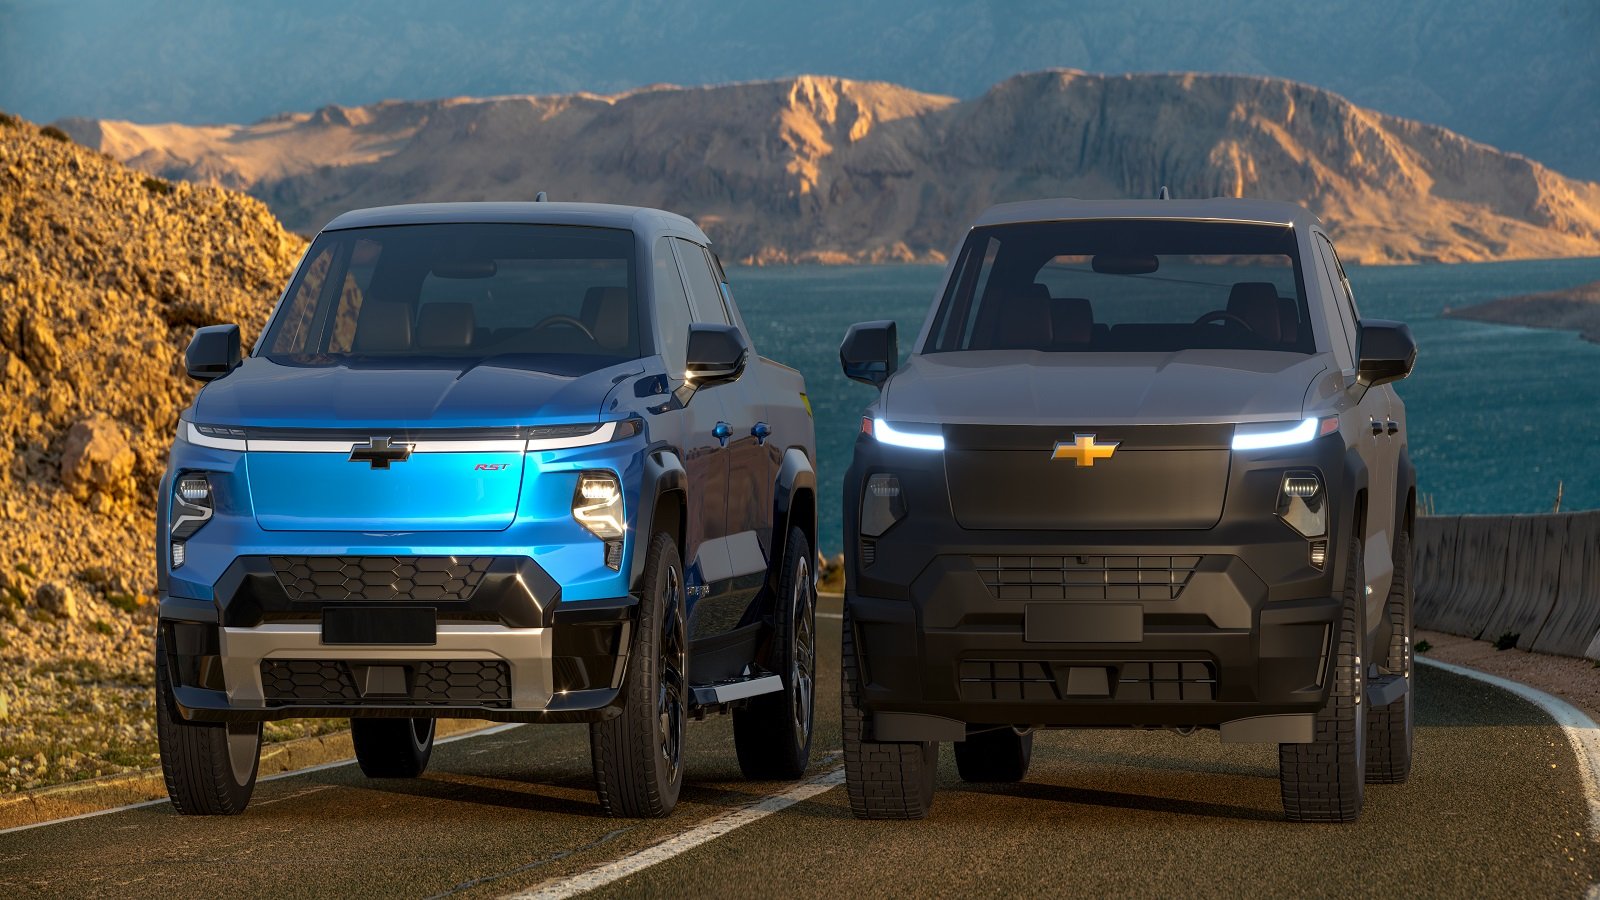 <p>The Chevrolet Silverado EV, an upcoming electric pickup truck, has been generating a lot of buzz. However, there are a few reasons why buyers might want to think twice before purchasing this vehicle:</p><ul> <li><strong>Charging infrastructure</strong>: Charging stations for EVs are still not as widespread as gas stations, which could result in difficulties finding a suitable charging location and time-consuming detours. The <a href="https://www.consumeraffairs.com/automotive/how-many-electric-cars-are-in-the-us.html" rel="noopener">Pew Research Center study</a> has reported that the lack of a robust EV charging network contributes to the weak EV appetite among Americans.</li> <li><strong>Battery cost and technology</strong>: While the cost of batteries is decreasing, they still contribute significantly to the overall cost of EVs. In 2020, the battery pack cost was around $137/kWh, and even though it is expected to decline to $101/kWh by 2024, it will still add considerable expense to owning an EV.</li> <li><strong>Towing capacity concerns</strong>: Electric vehicles might not provide the same performance in terms of towing capacity as their internal combustion engine counterparts. This could be a major concern for those who need a truck for heavy-duty activities and could be a limiting factor for potential Silverado EV buyers.</li> <li><strong>Upcoming competitors</strong>: The electric truck market is becoming crowded, with several automakers planning to launch new models over the next few years, such as the Tesla Cybertruck and the Ford F-150 Lightning. These upcoming models could offer better features, performance, and brand value, making it difficult for the Silverado EV to stand out.</li> </ul>